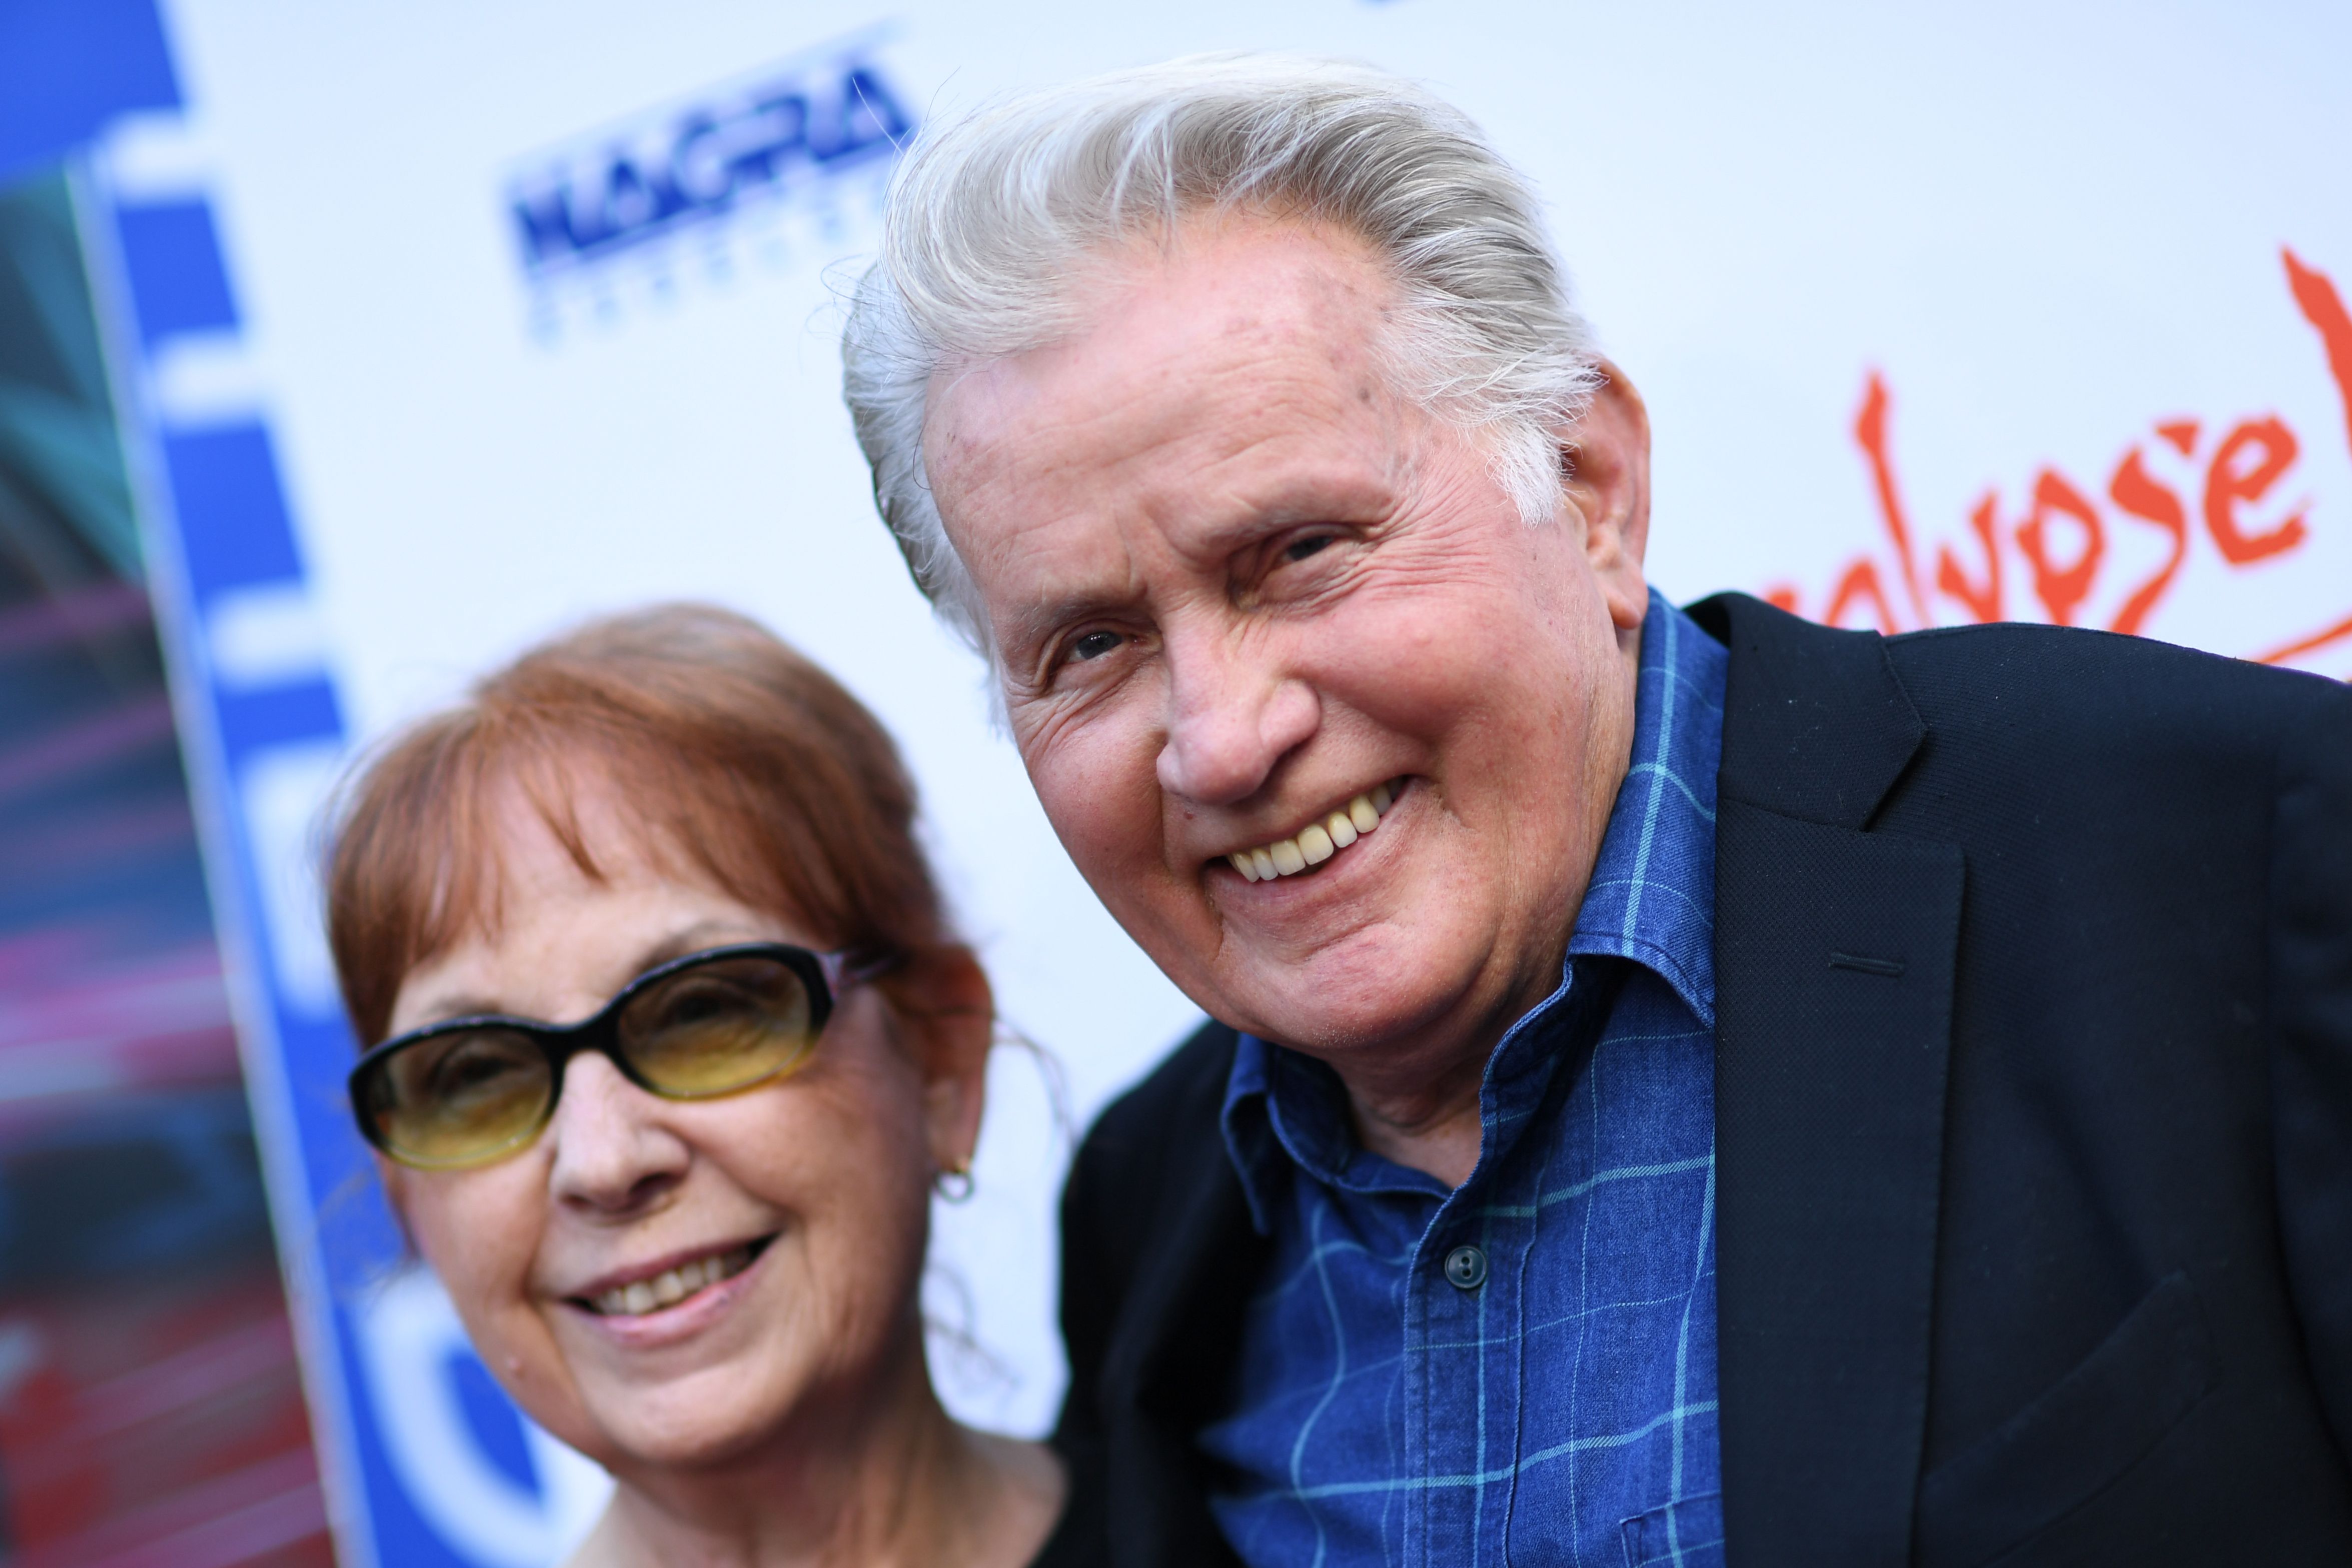 Martin Sheen and Janet Templeton attend the "Apocalypse Now" Final Cut red carpet screening in Los Angeles on August 12, 2019.┃Source: Getty Images